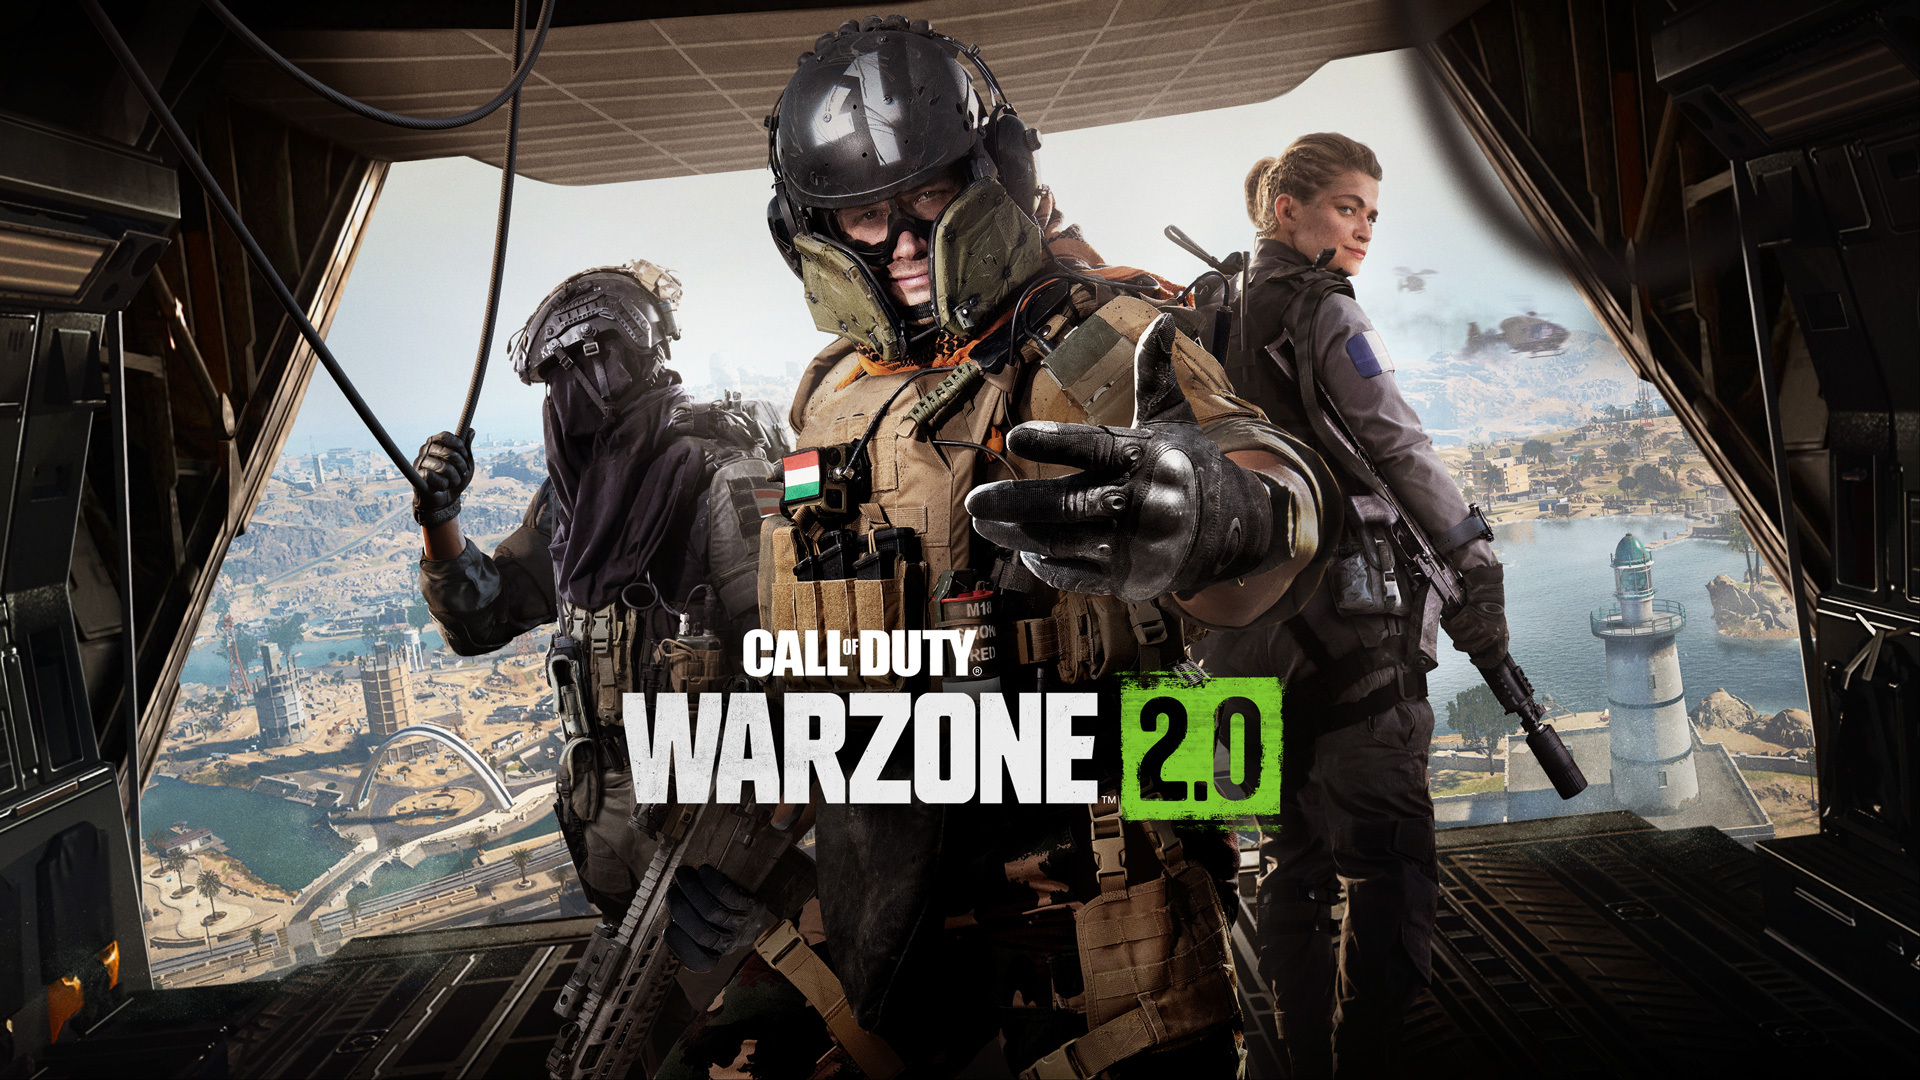 Call of Duty Warzone HD Wallpapers | 4K Backgrounds - Wallpapers Den